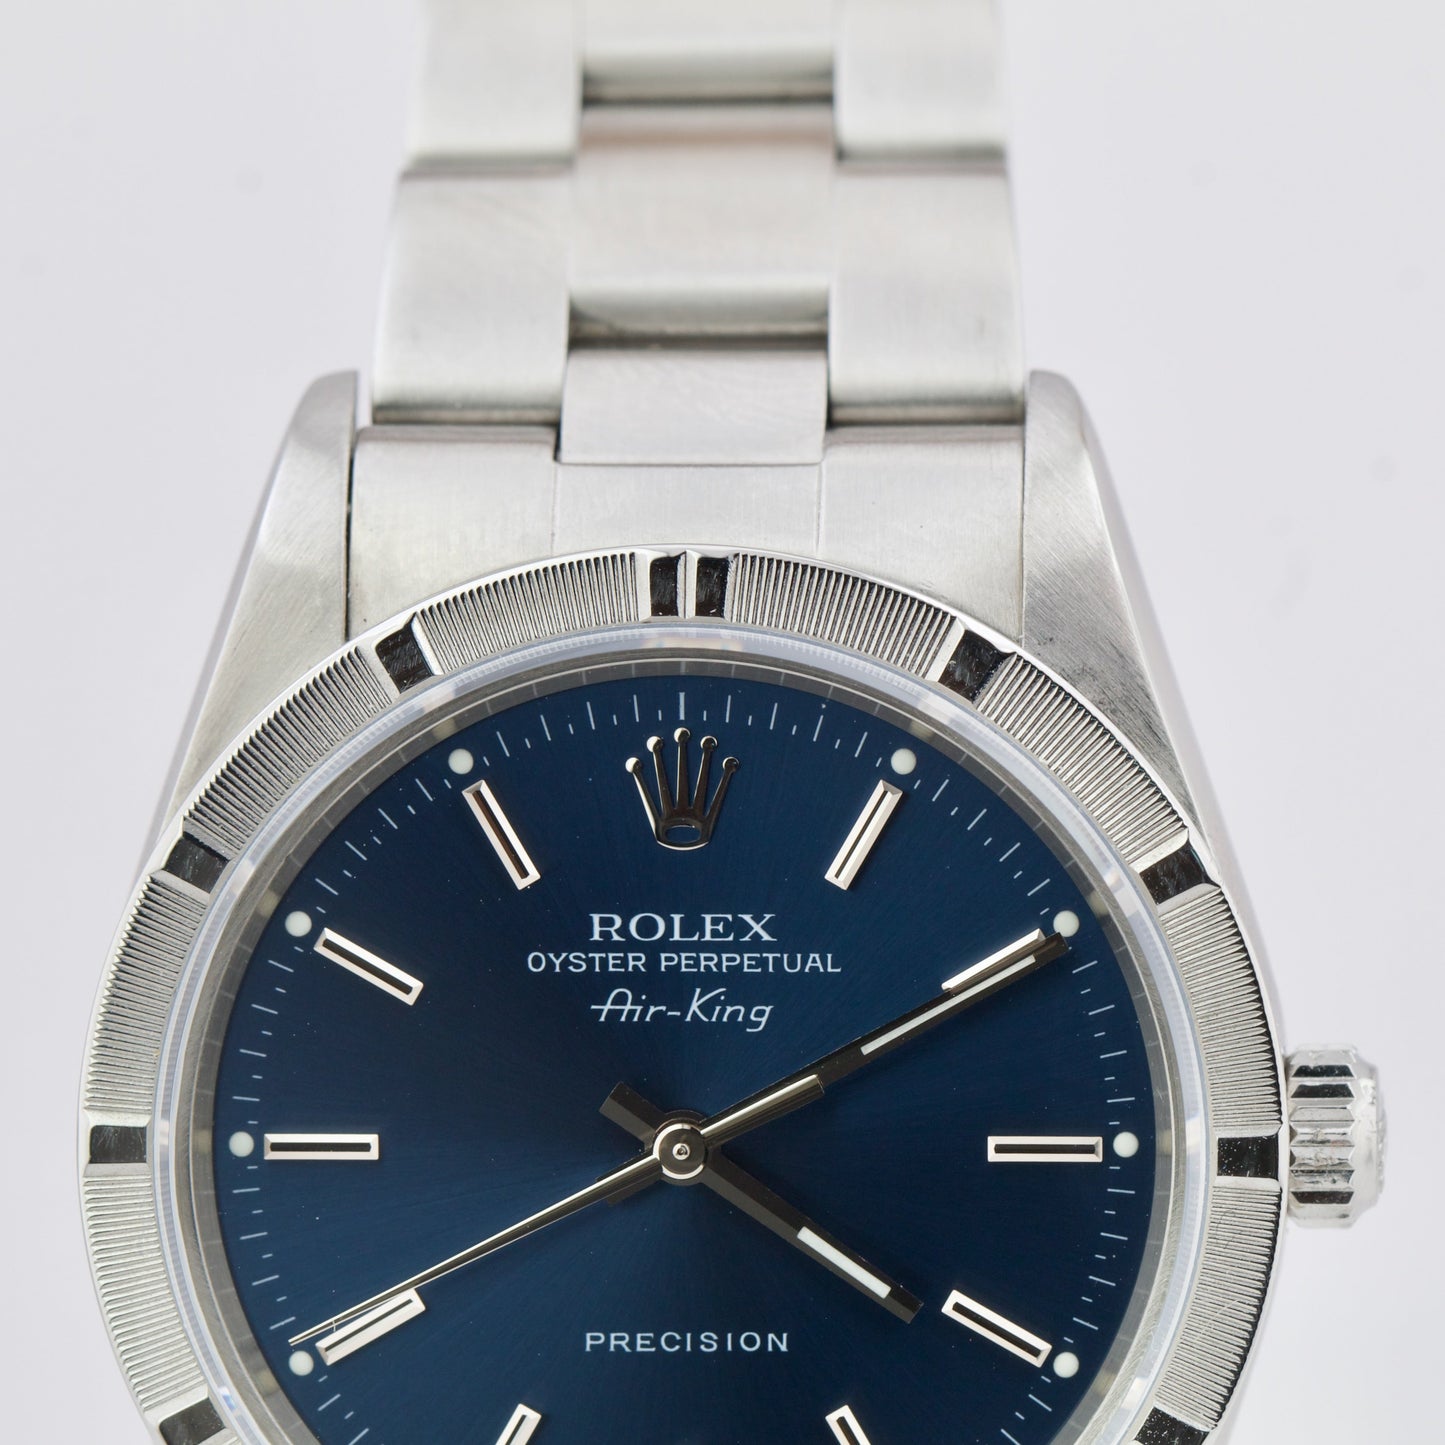 Rolex Oyster Perpetual Air-King Blue 14010M Stainless Steel NO-HOLES 34mm Watch